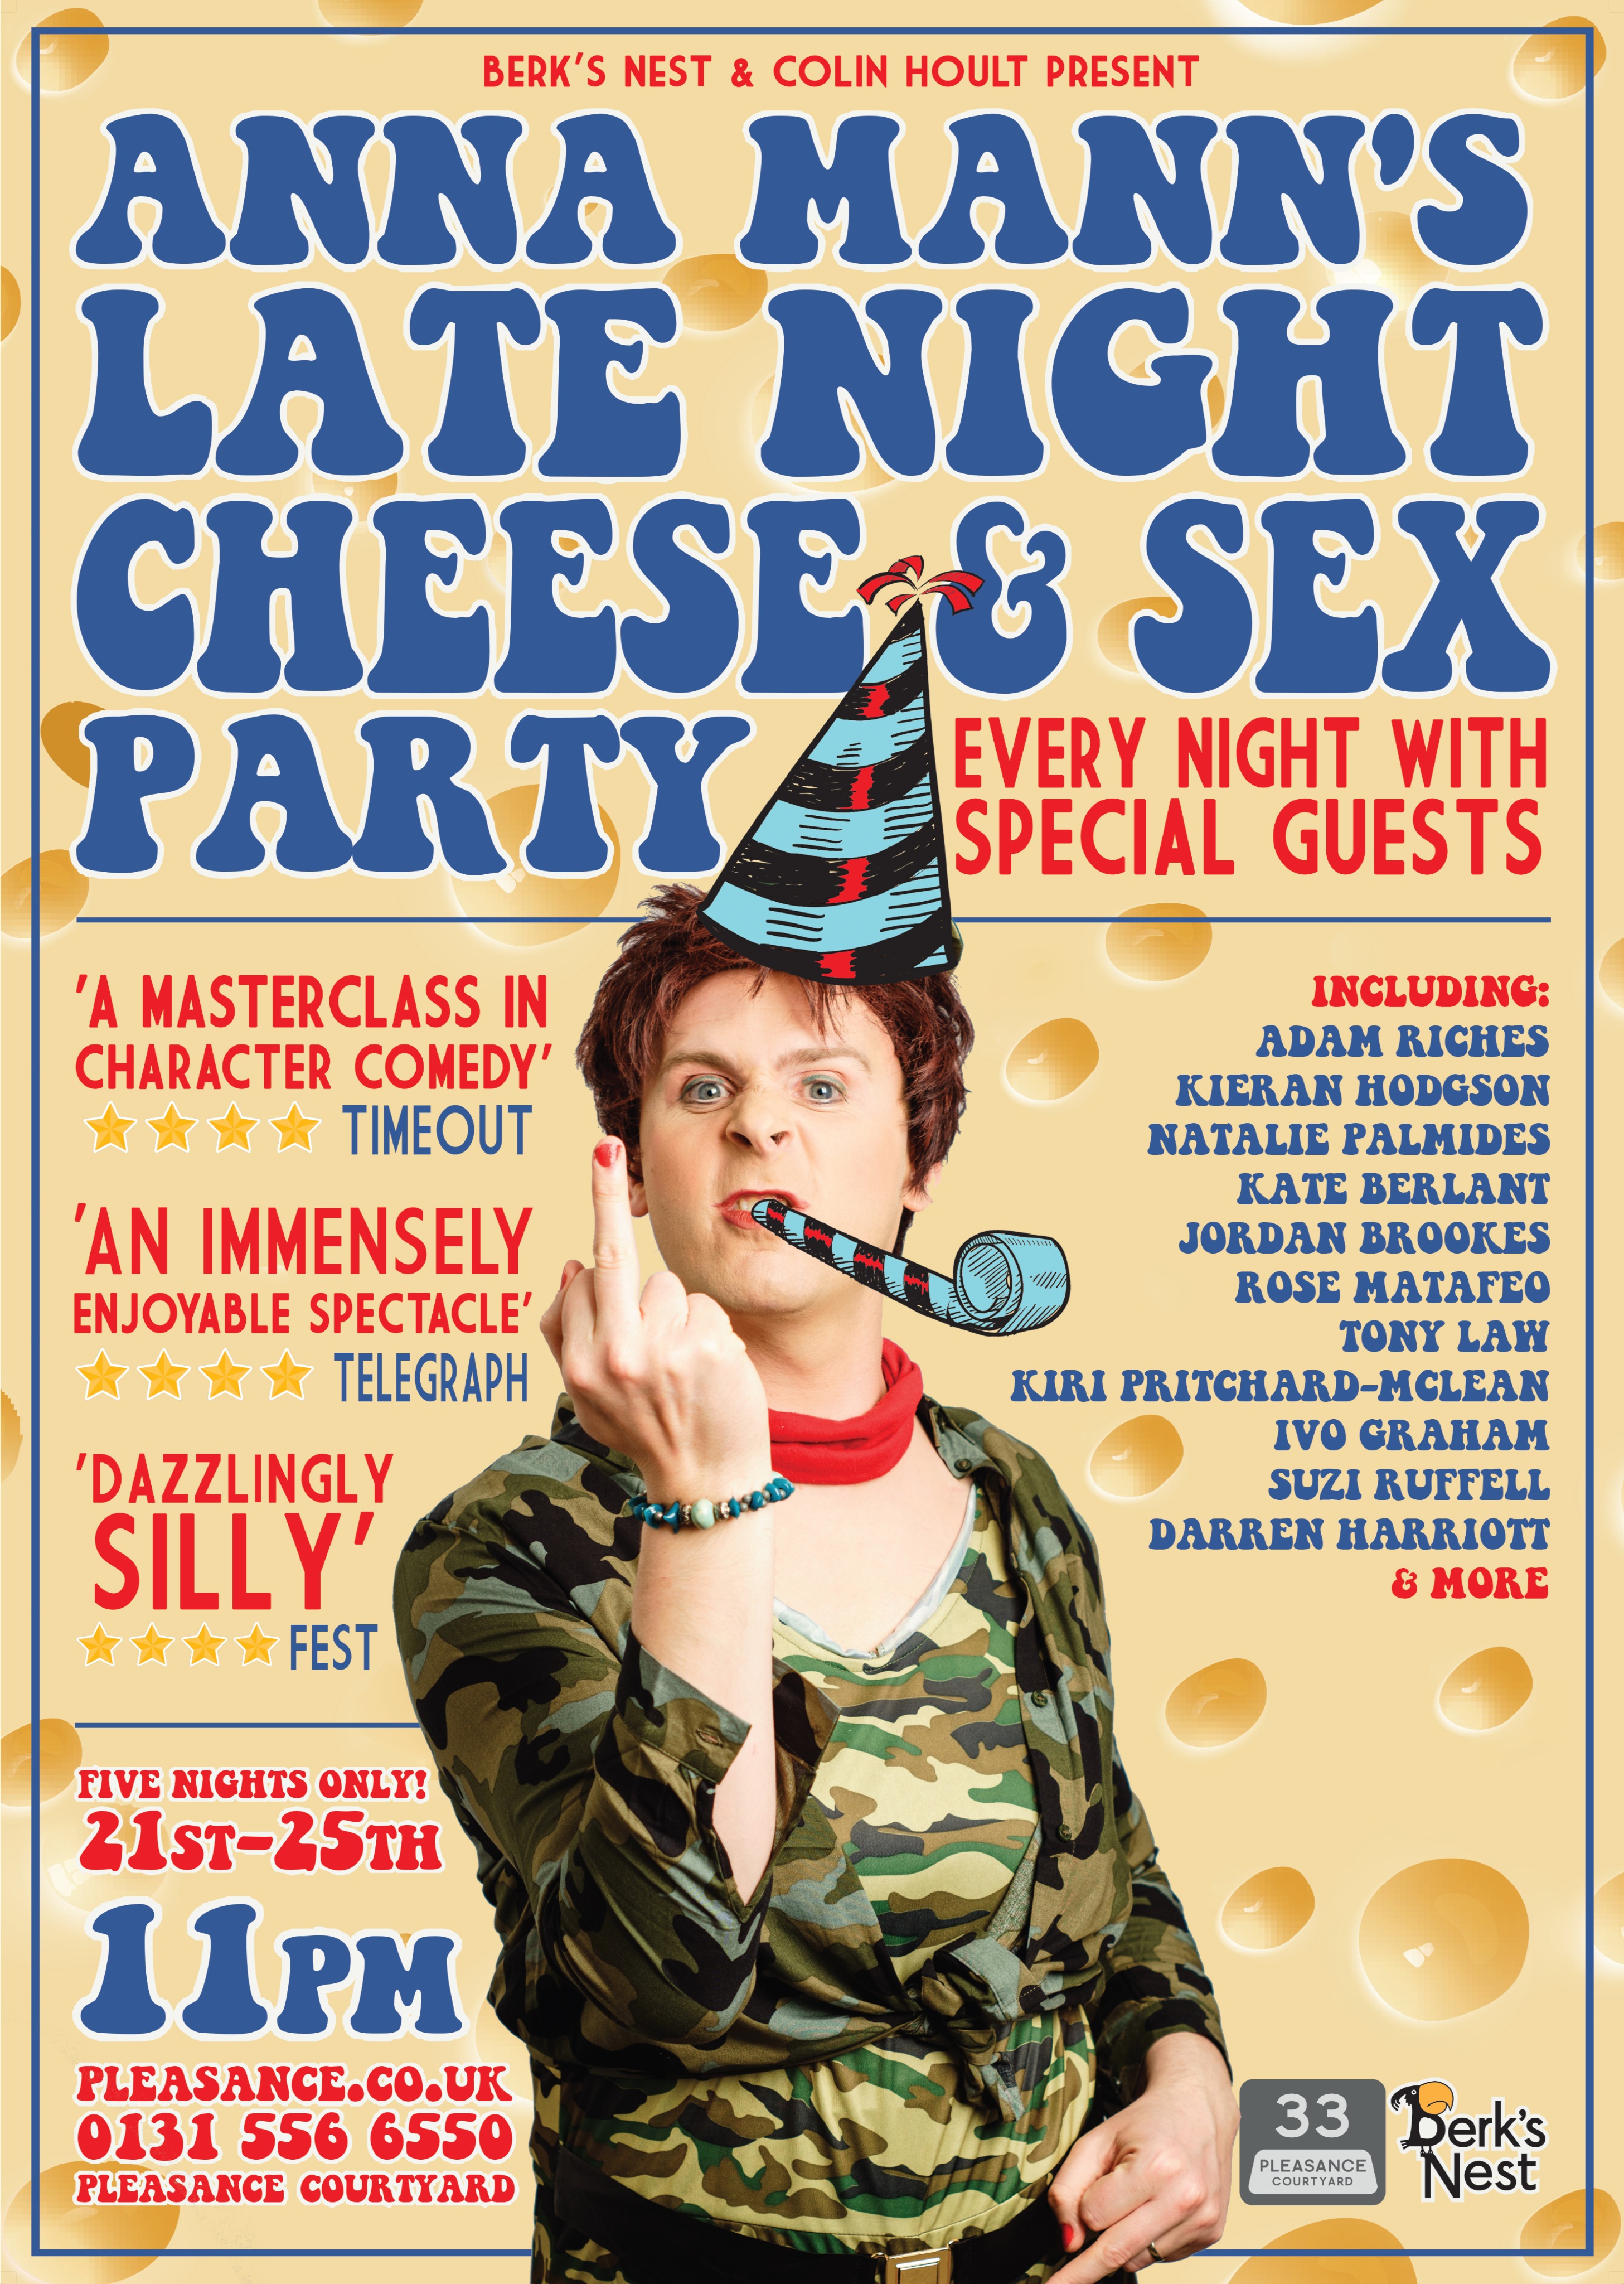 The poster for Anna Mann's Late Night Cheese And Sex Party